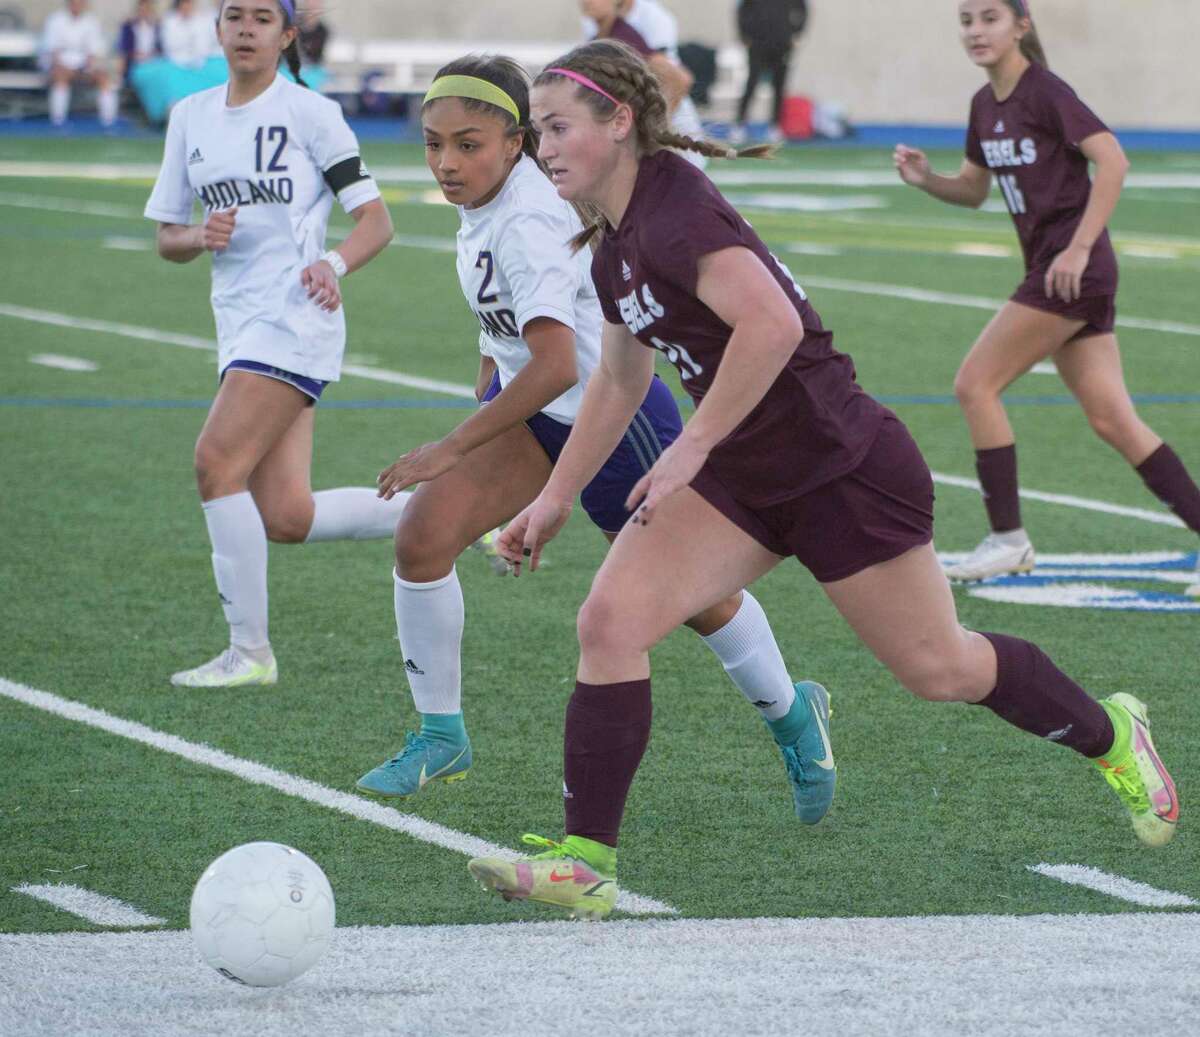 Legacy High's Rylee Low brings the ball up the sideline as Midland High's Anahy Grimaldo chases her 02/08/2022 at Grande Communications Stadium. Tim Fischer/Reporter-Telegram